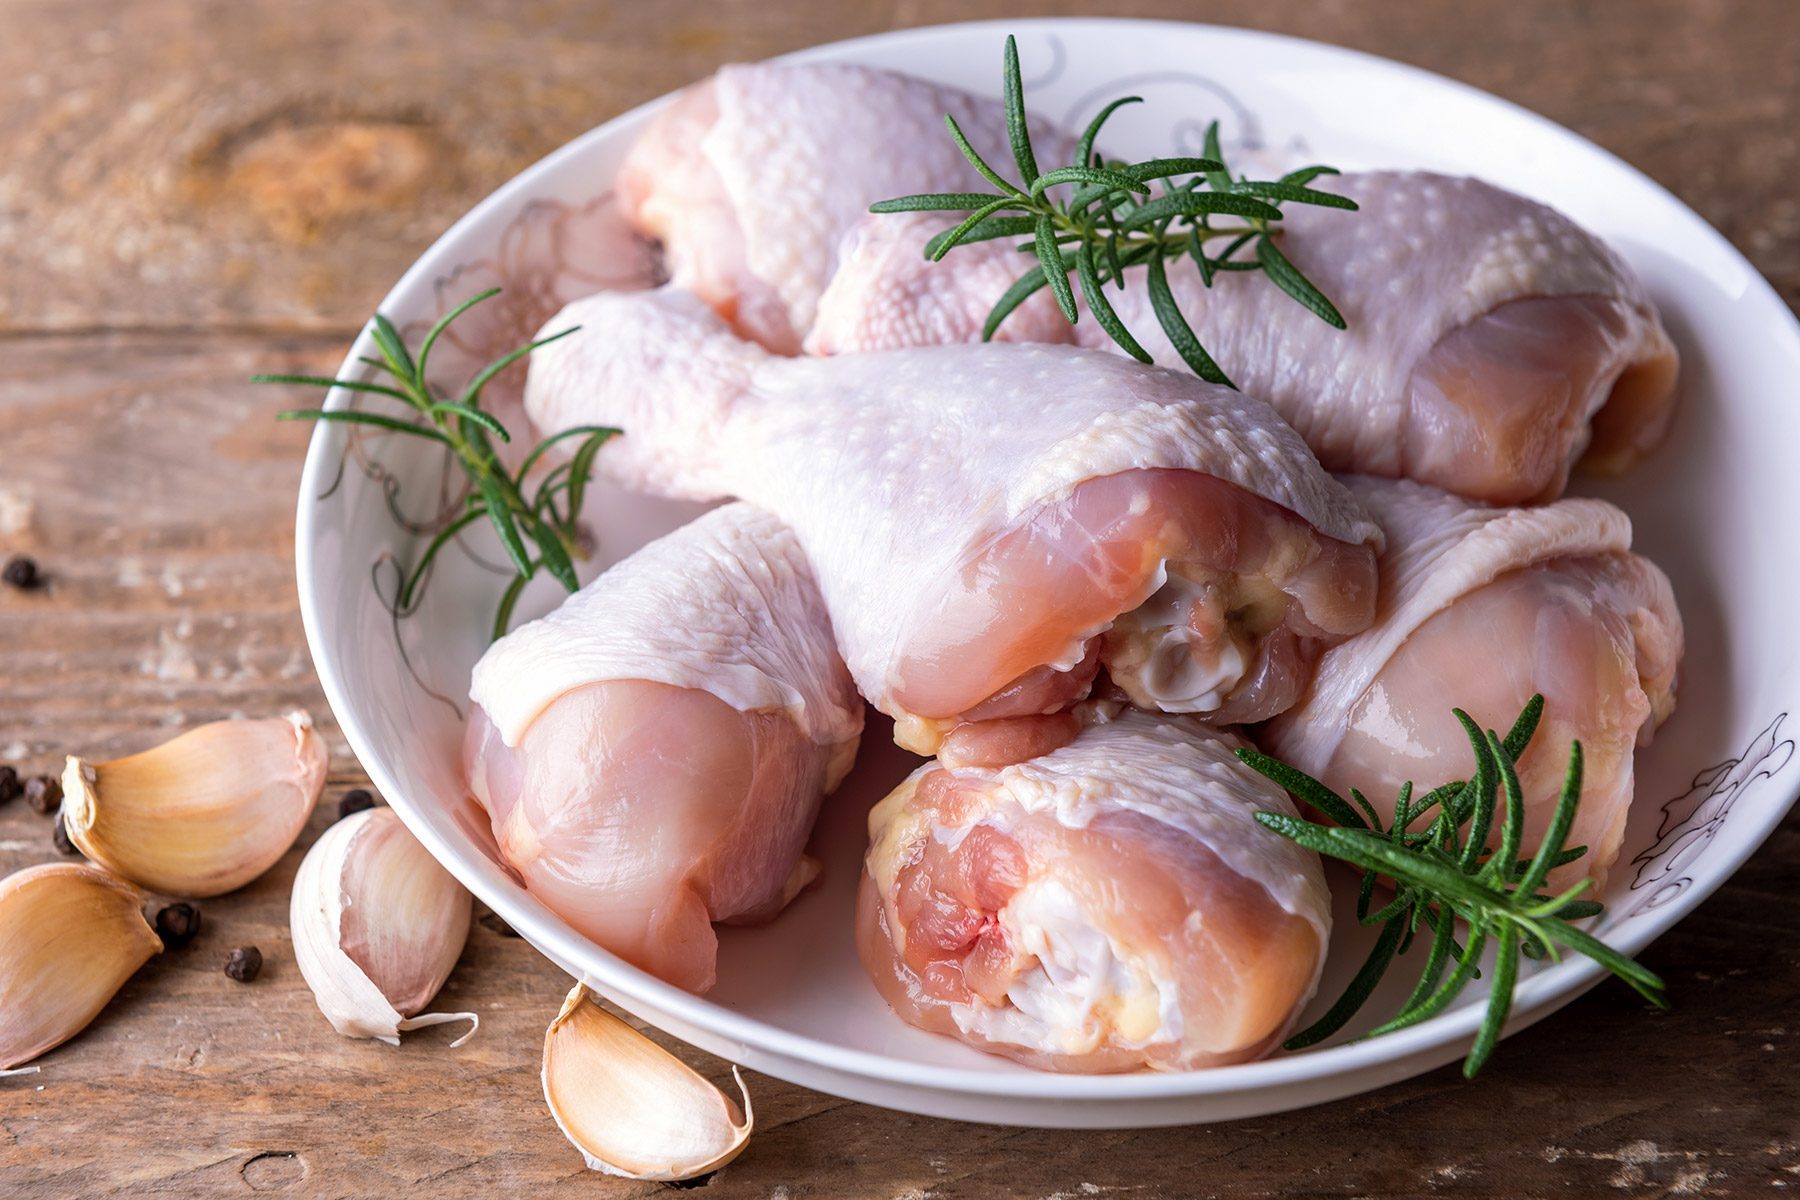 The 5 Best Healthy Meats To Eat Poultry Dark Meat Gettyimages 1345761813